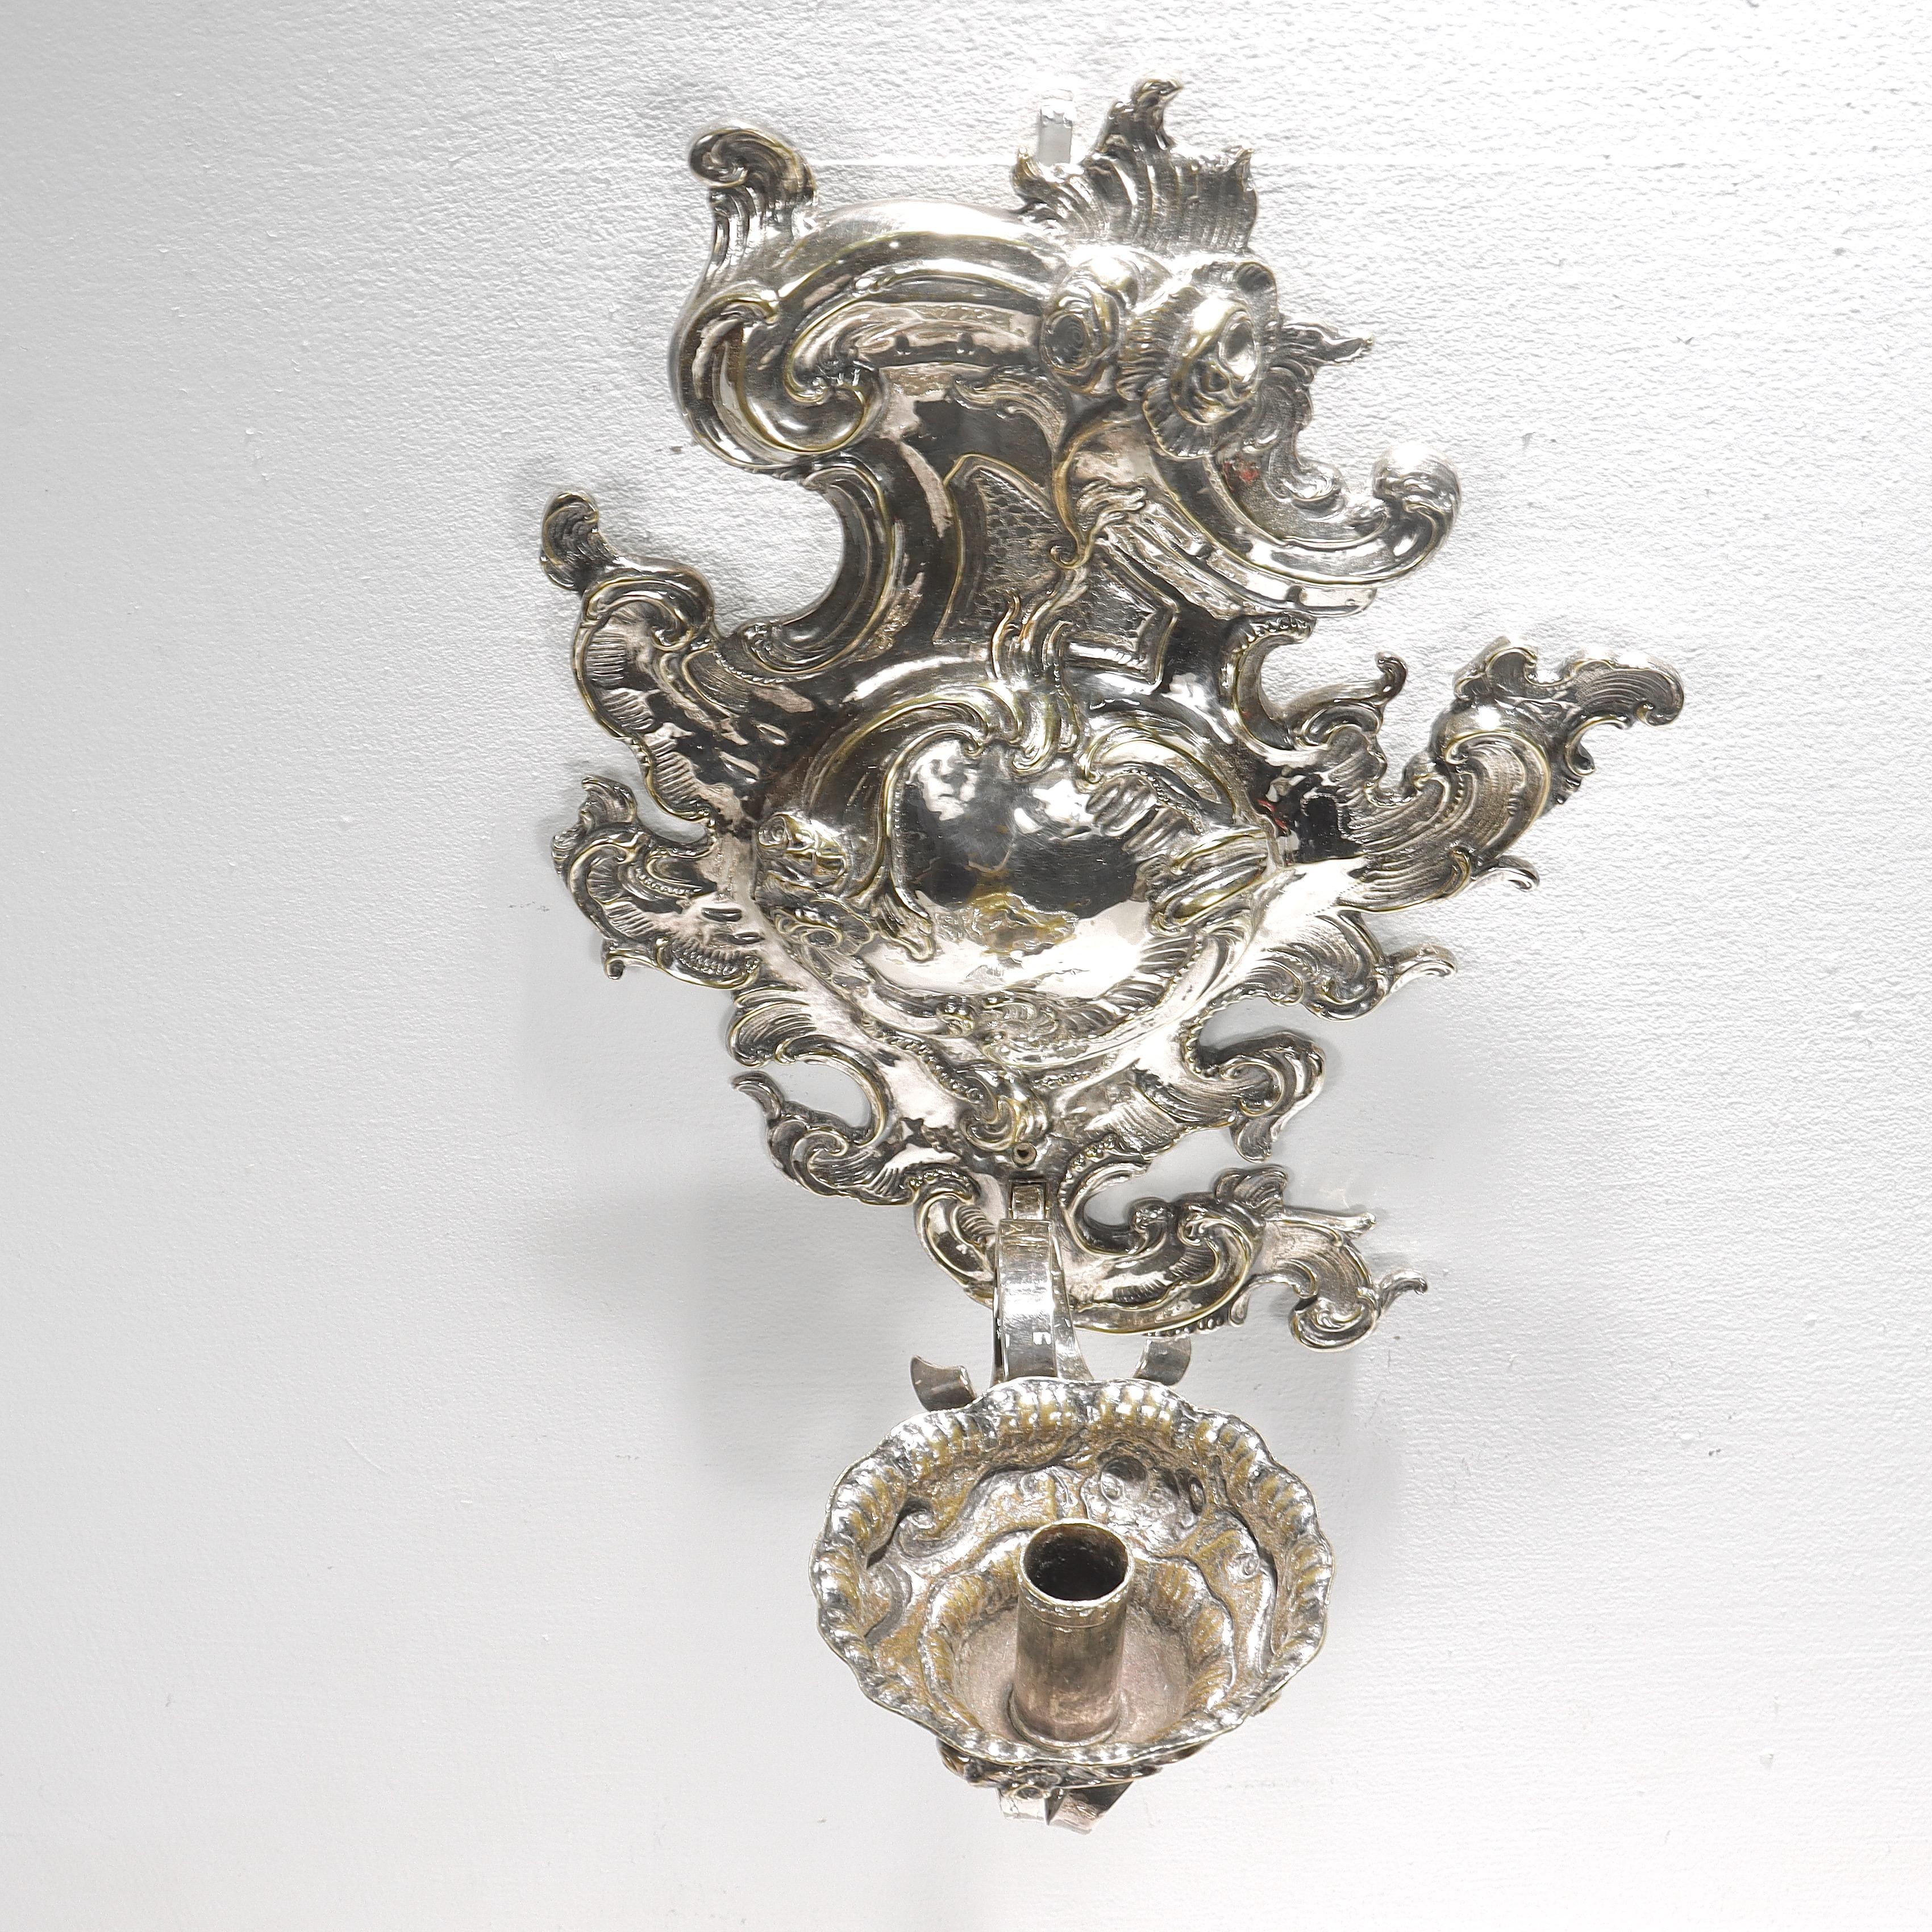 Antique Rococo or Rococo Revival Silver Plated Wall Sconces For Sale 5